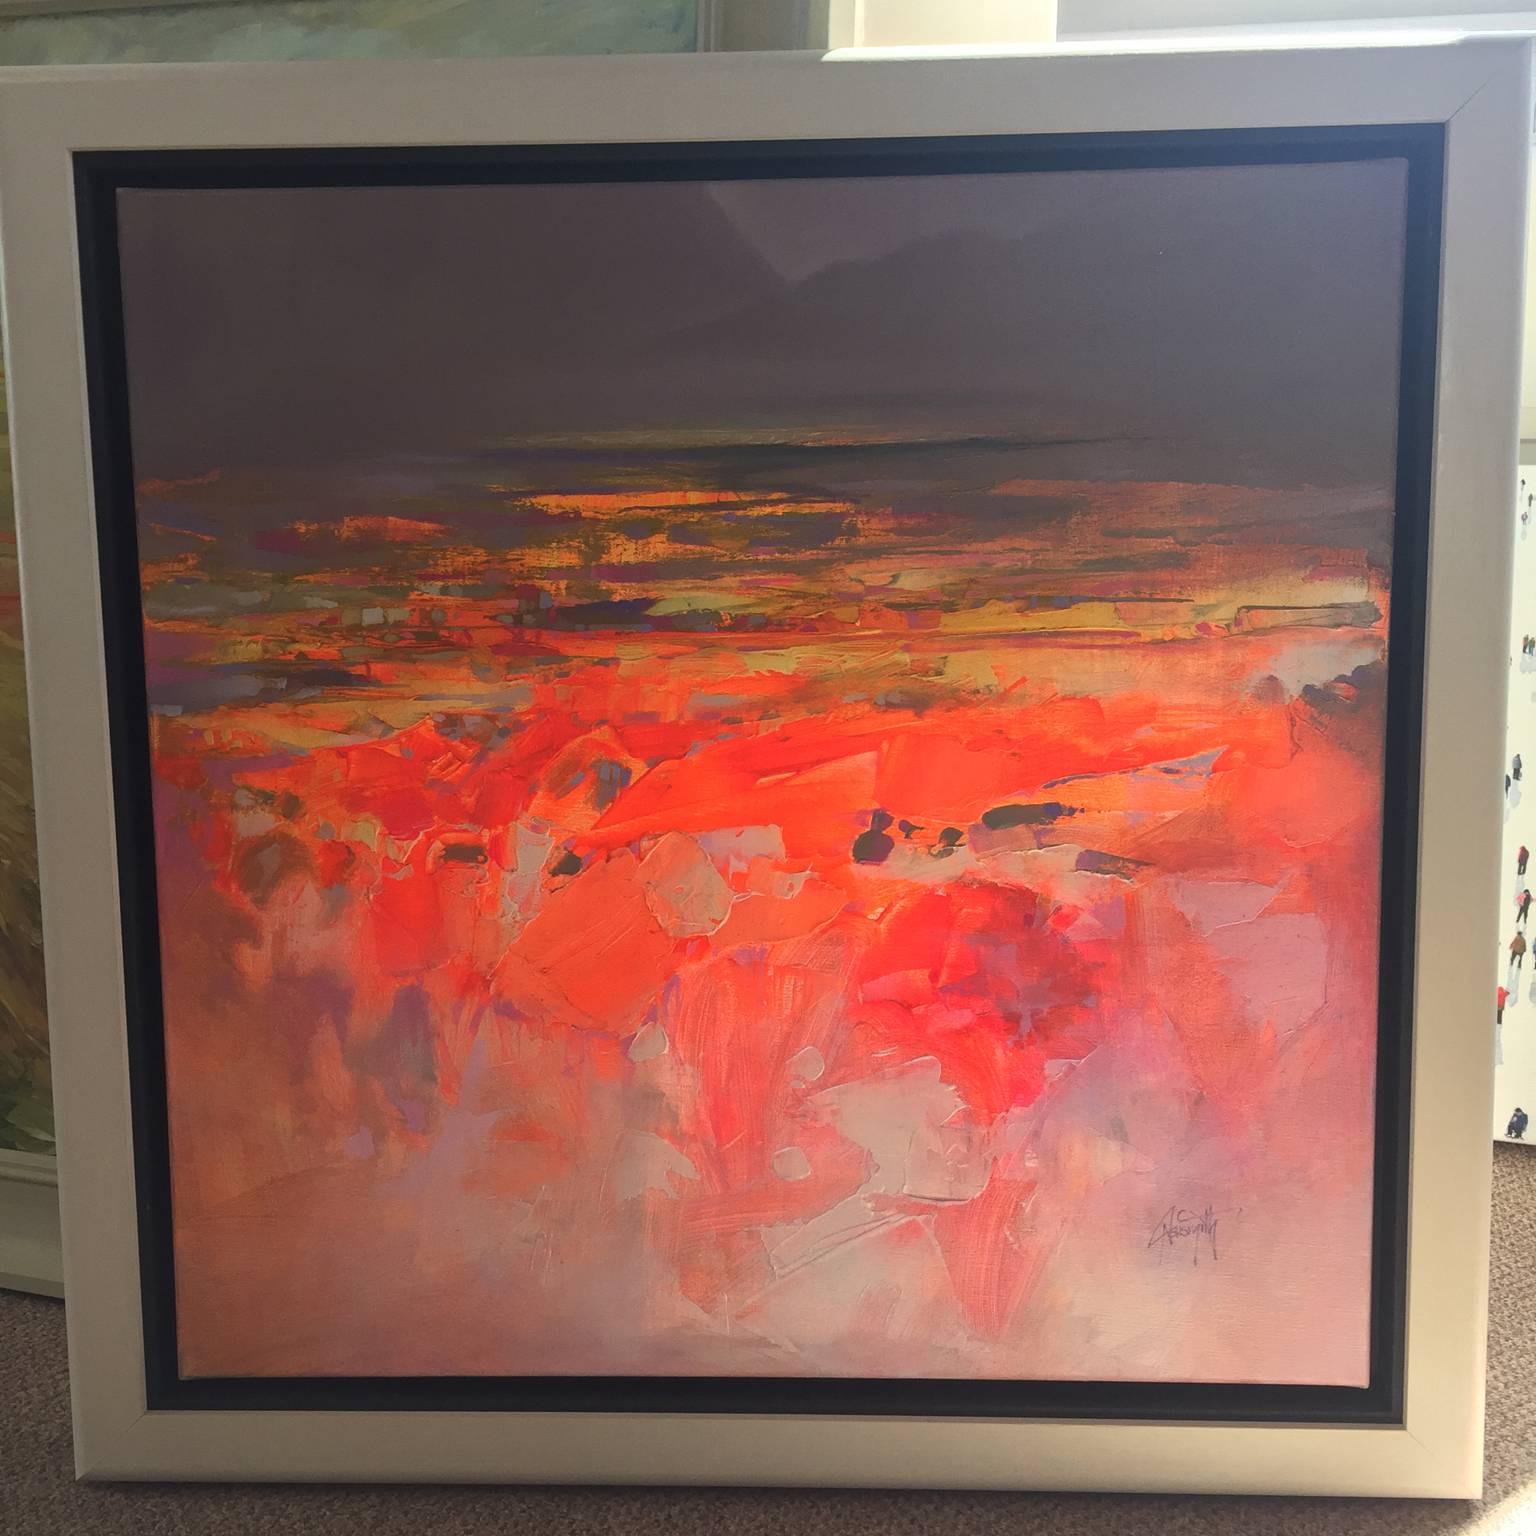 Scott Naismith's painting 'Fluid Dynamics III' is an original acrylic and oil painting on linen. The canvas size is H:60cm x W:60cm. The frame size is H:70cm x W:70cm x D:5cm.

Scott Naismith spends much of his time travelling around Scotland